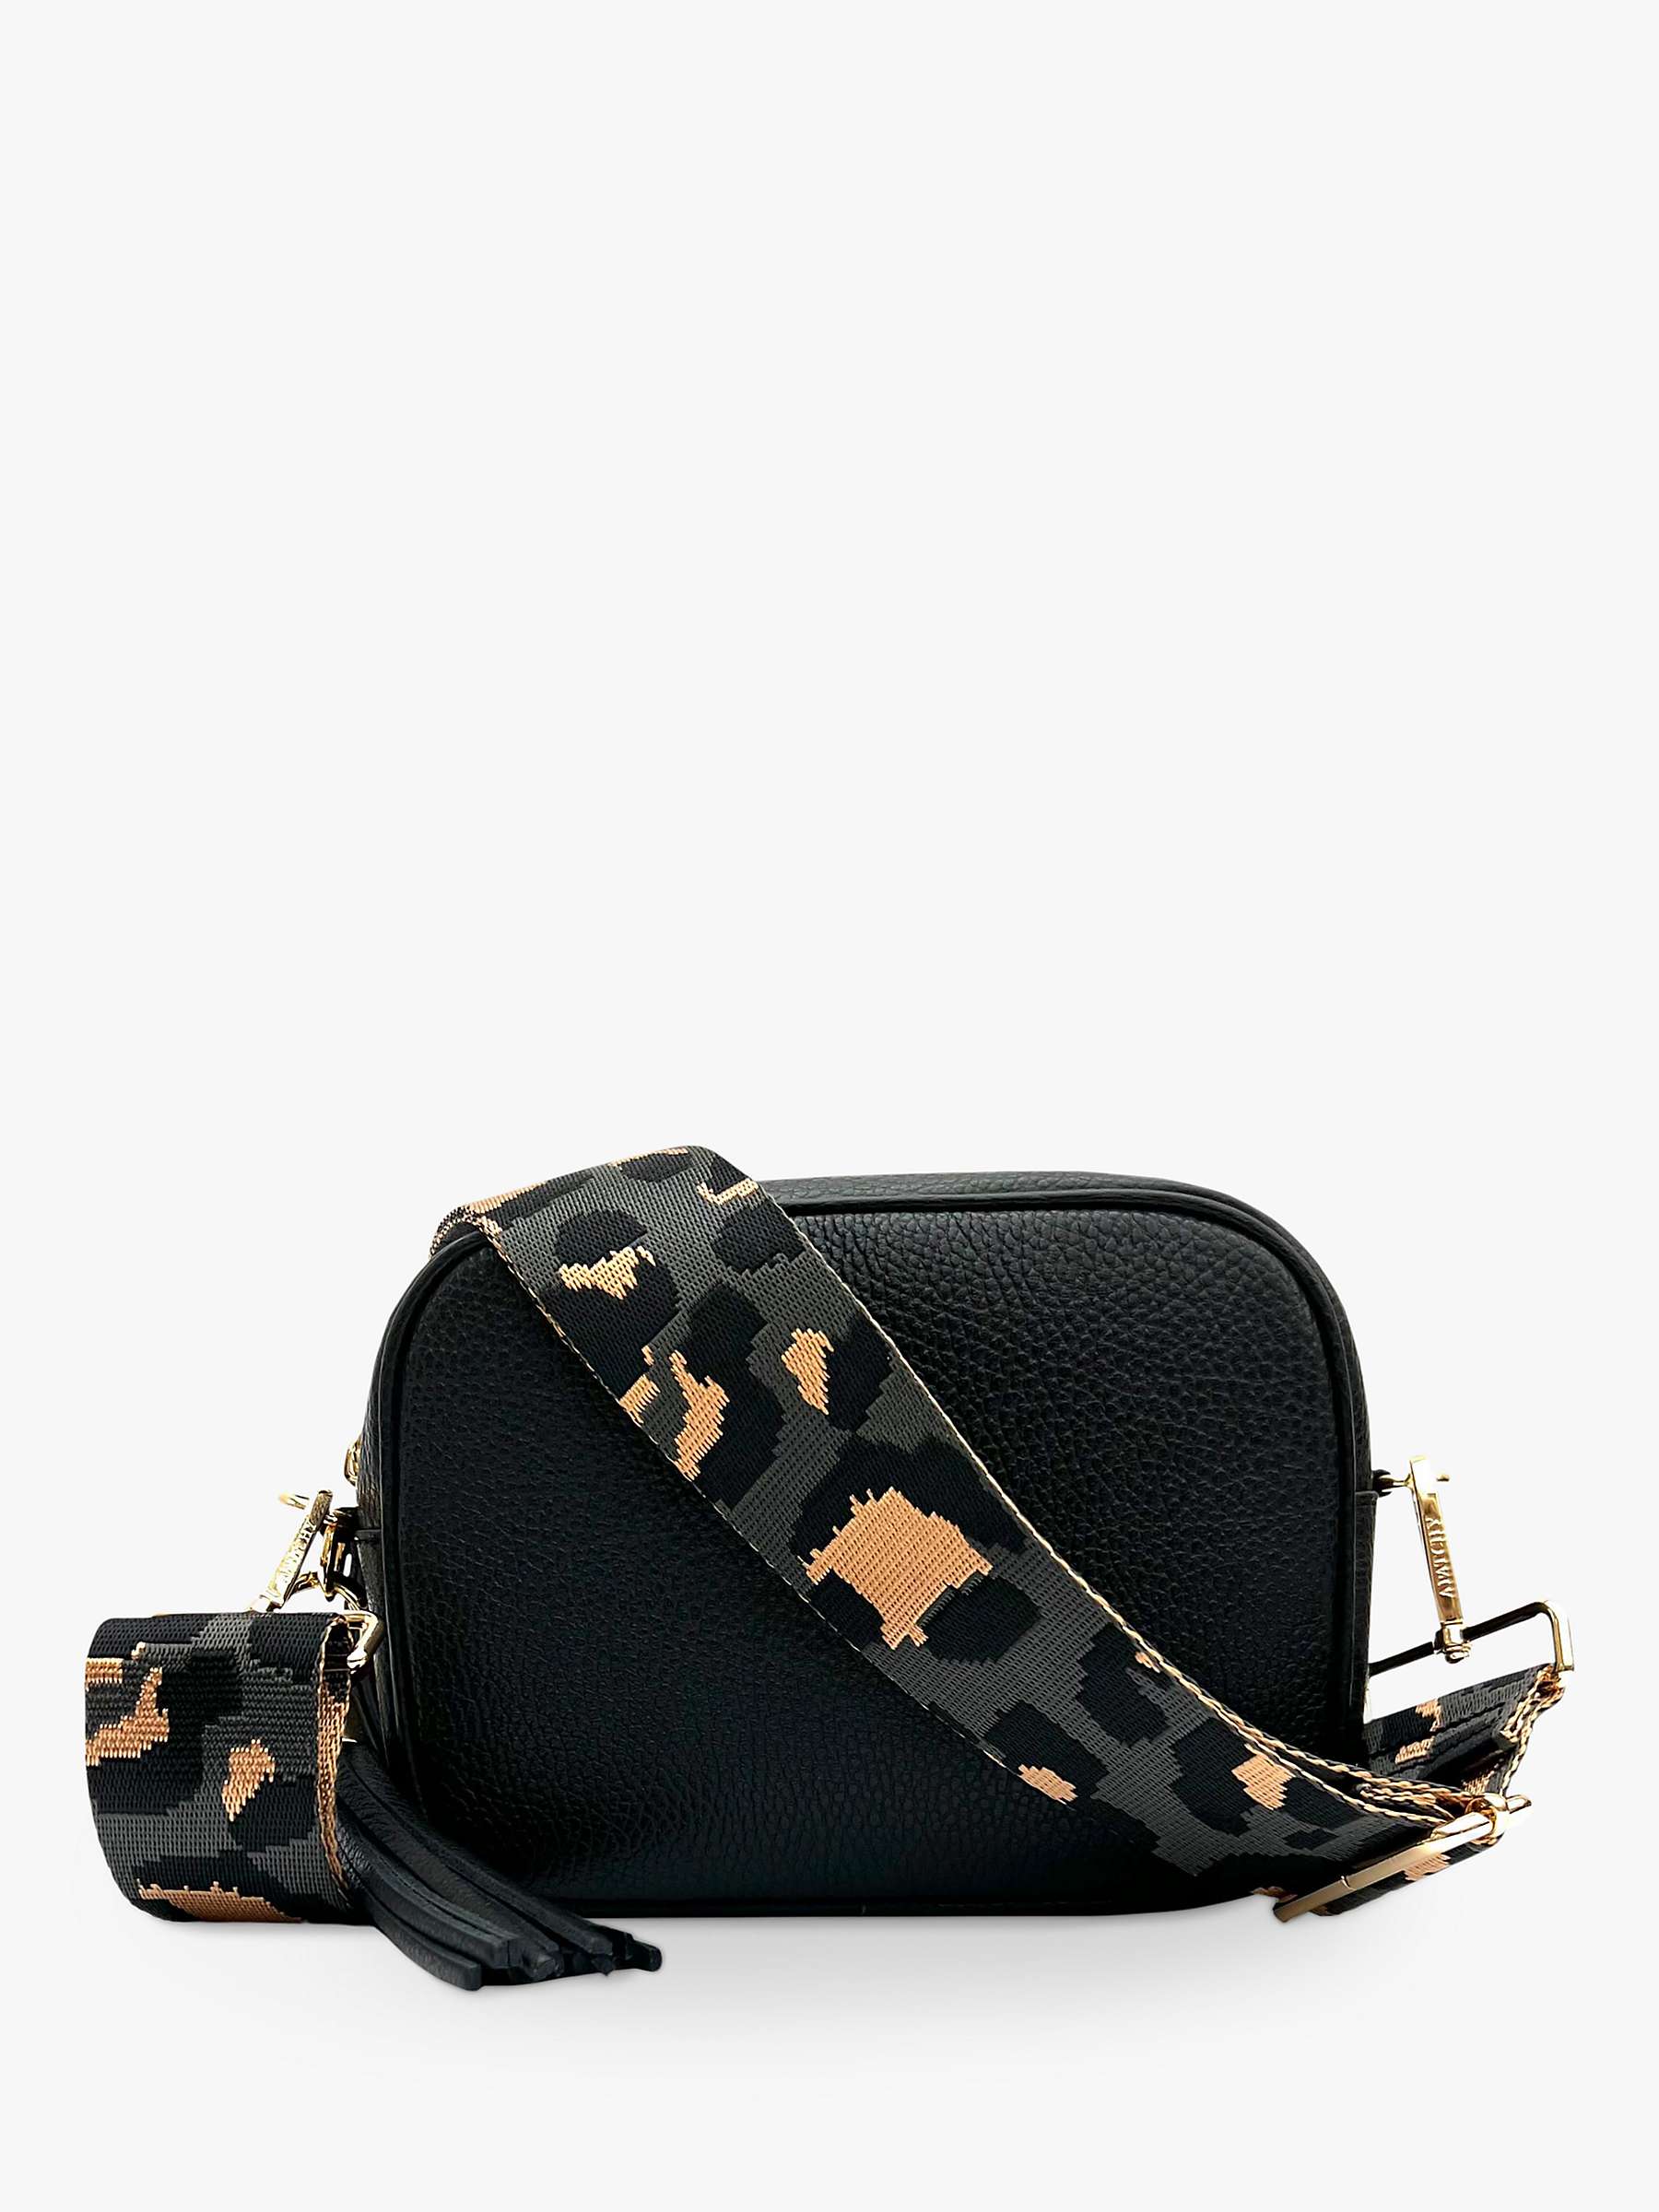 Buy Apatchy Leopard Print Strap Leather Cross Body Bag Online at johnlewis.com